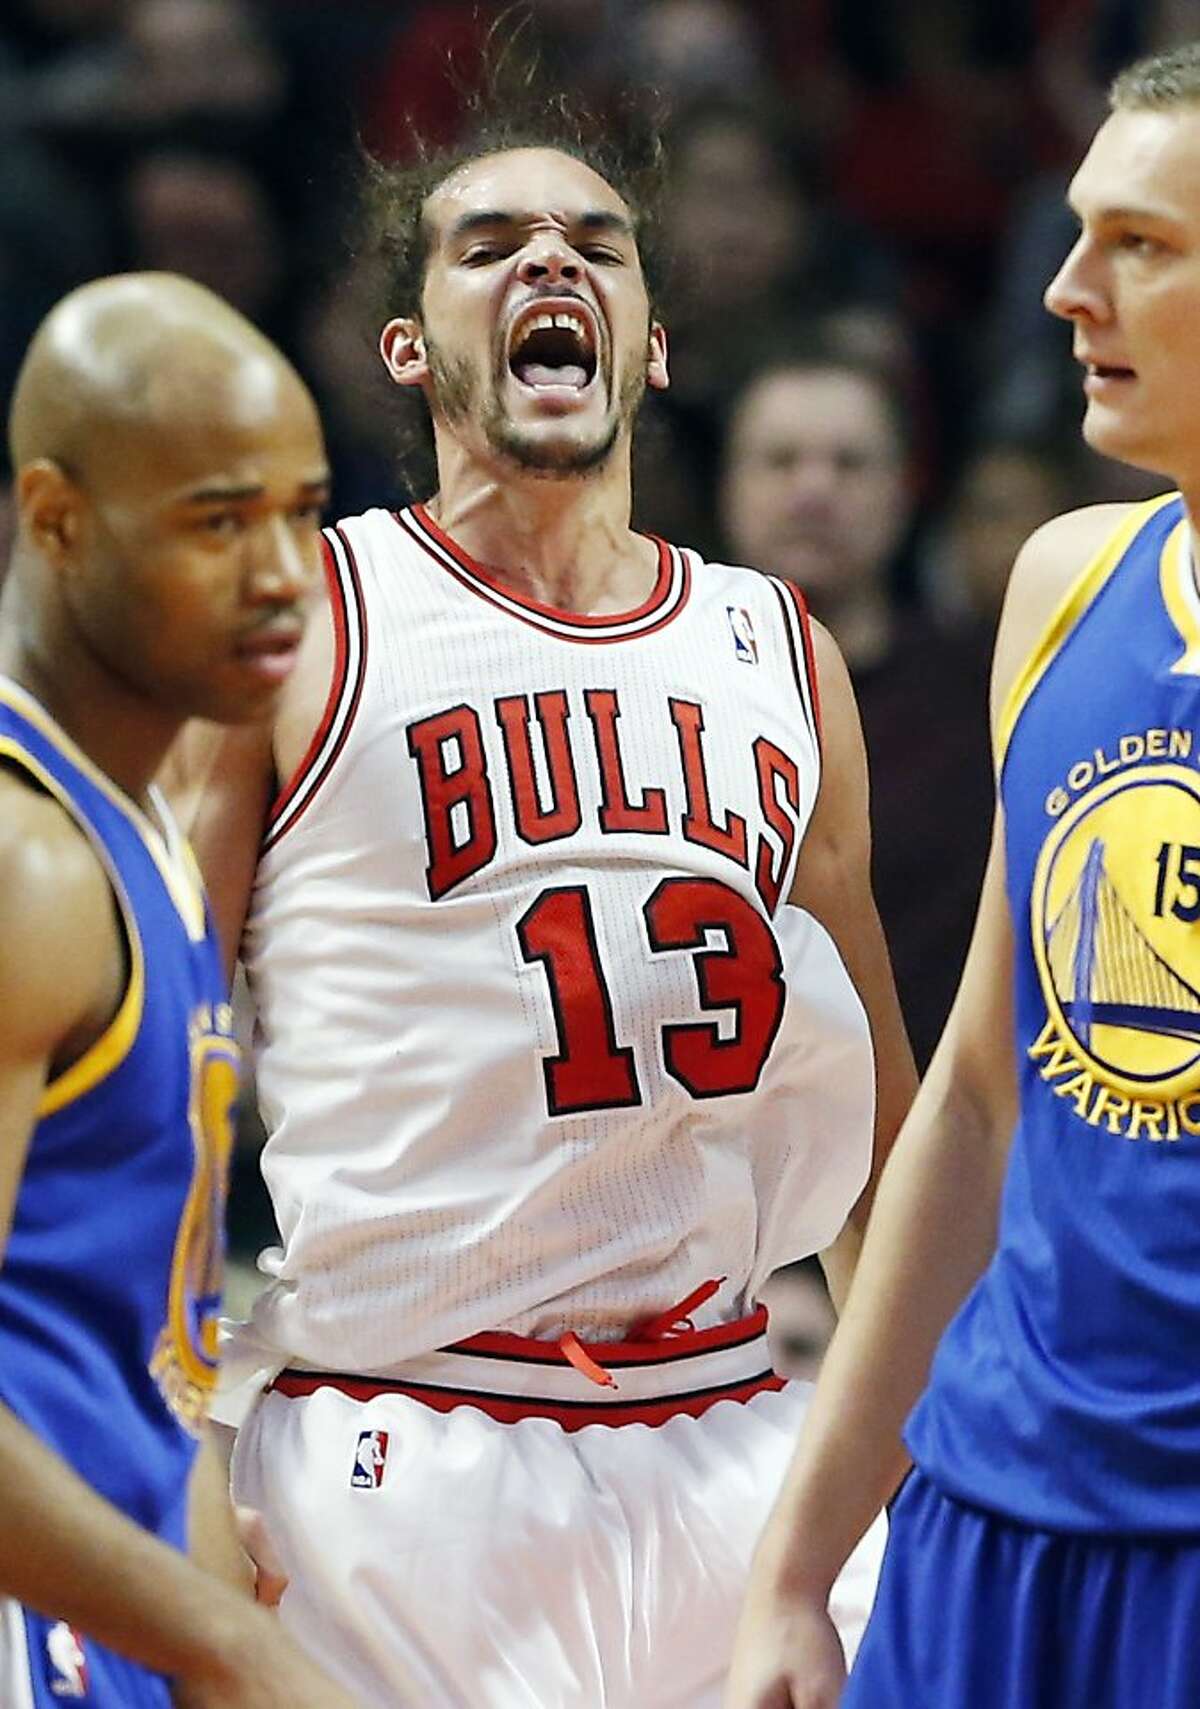 Chicago Bulls center Joakim Noah, center, reacts after Golden State Warriors' player fouled during the first half of an NBA basketball game in Chicago on Friday, Jan. 25, 2013. (AP Photo/Nam Y. Huh)